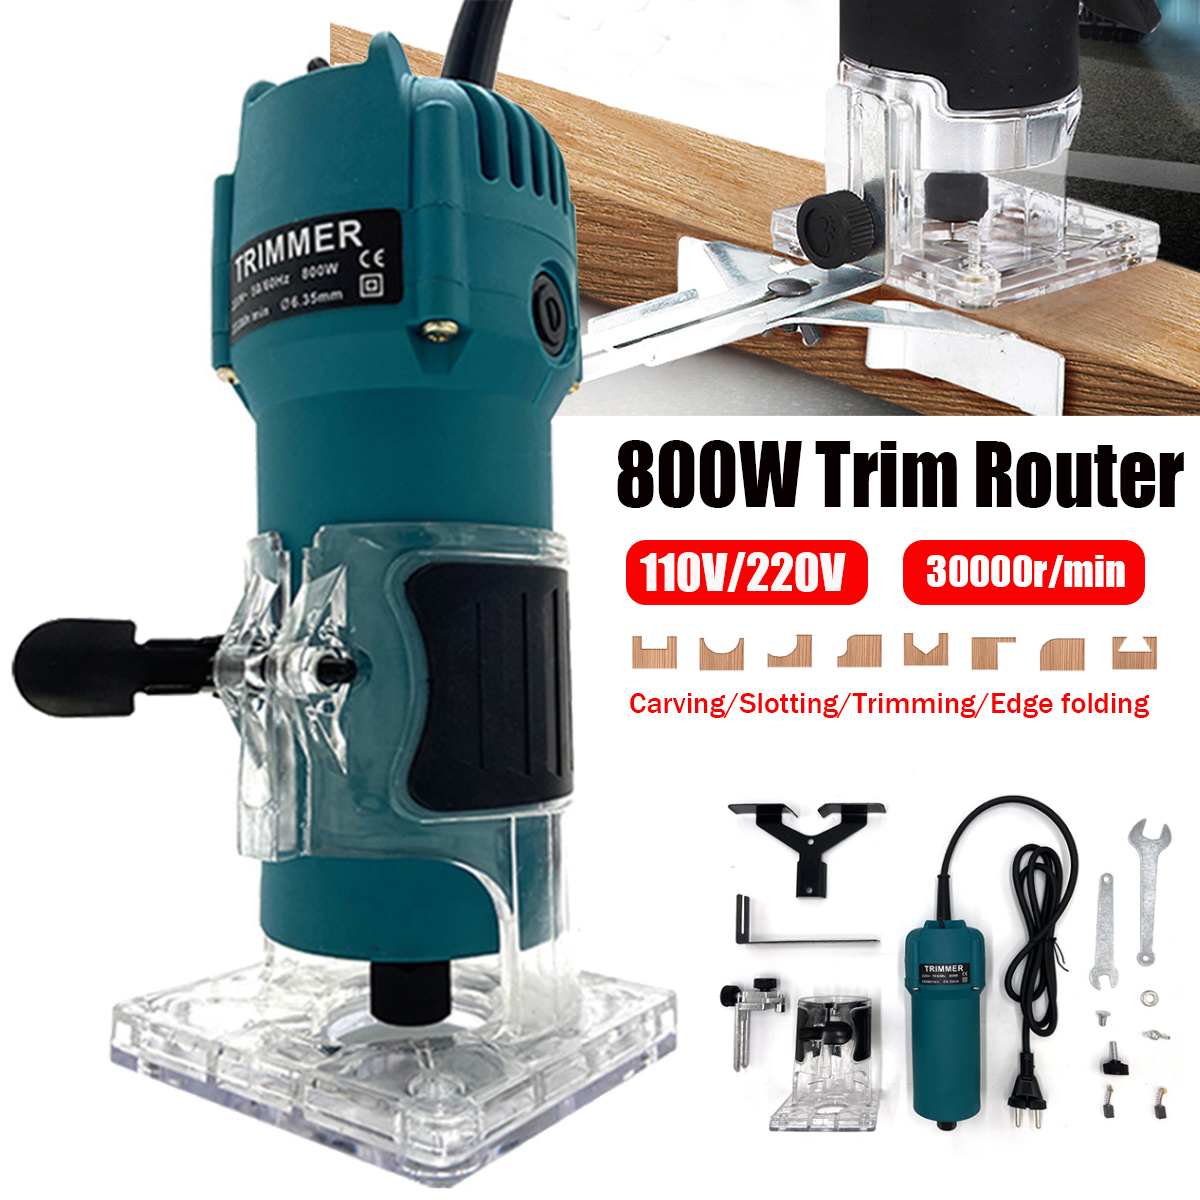 110V220V-800W-Trim-30000RPM-Router-Edge-Wood-Clean-Cuts-Power-Woodworking-Tool-1752233-1